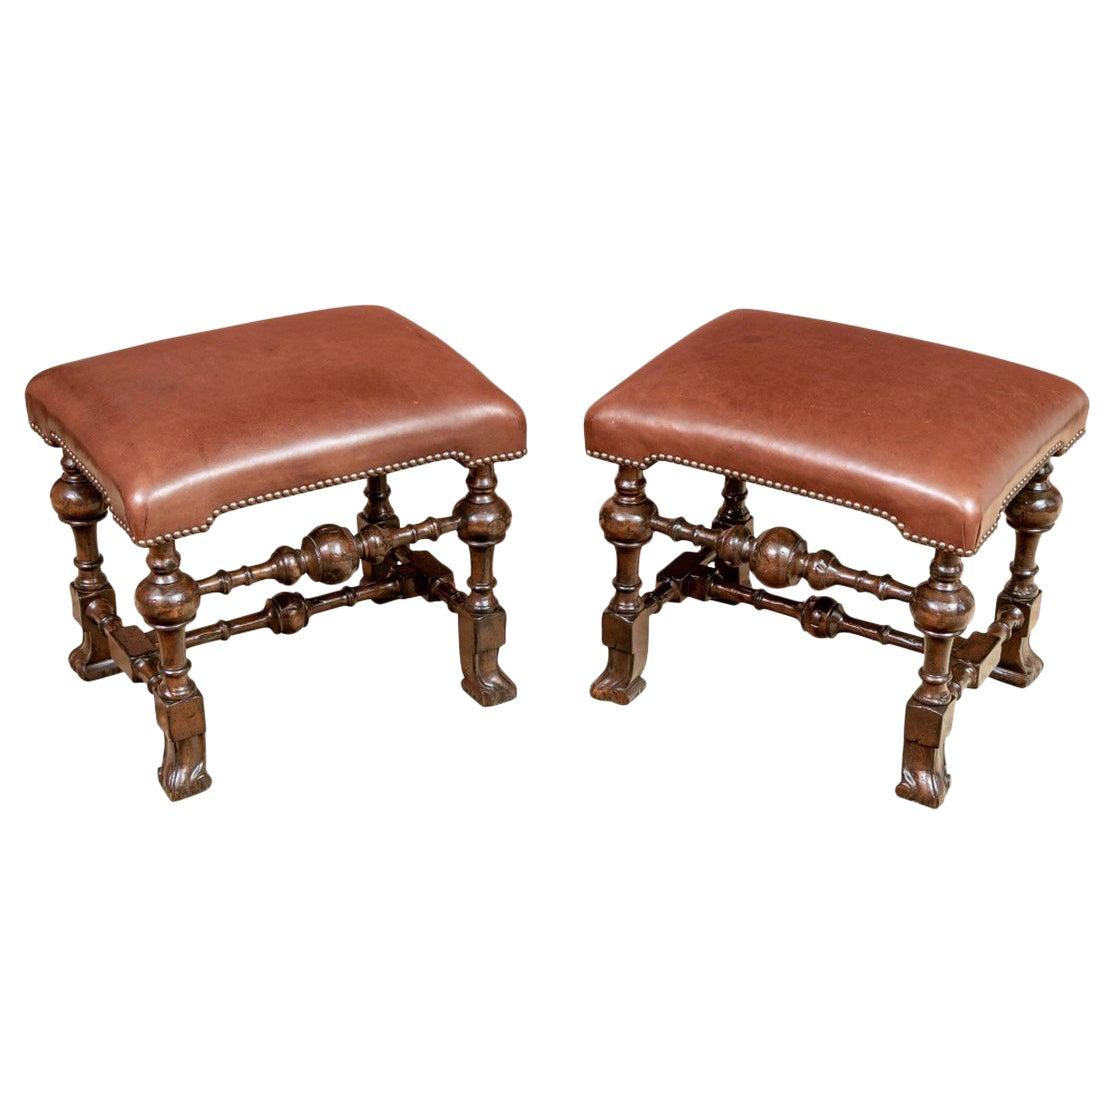 Pair of Antique Jacobean Style Stools with Leather Tops